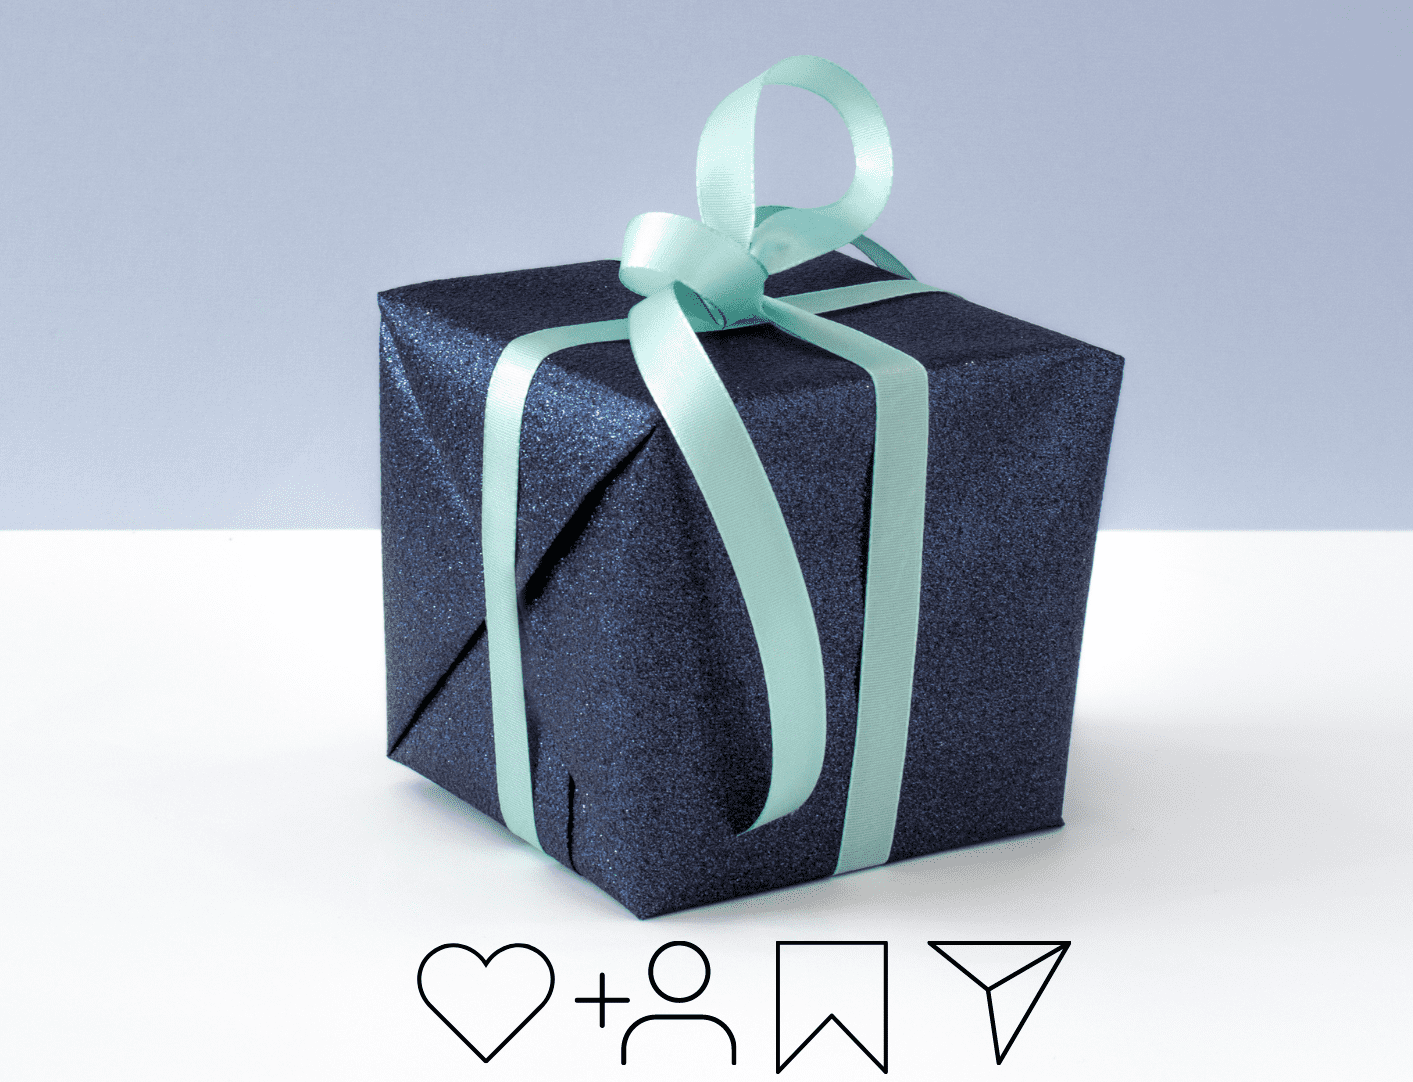 How to make an Instagram giveaway in 6 steps?